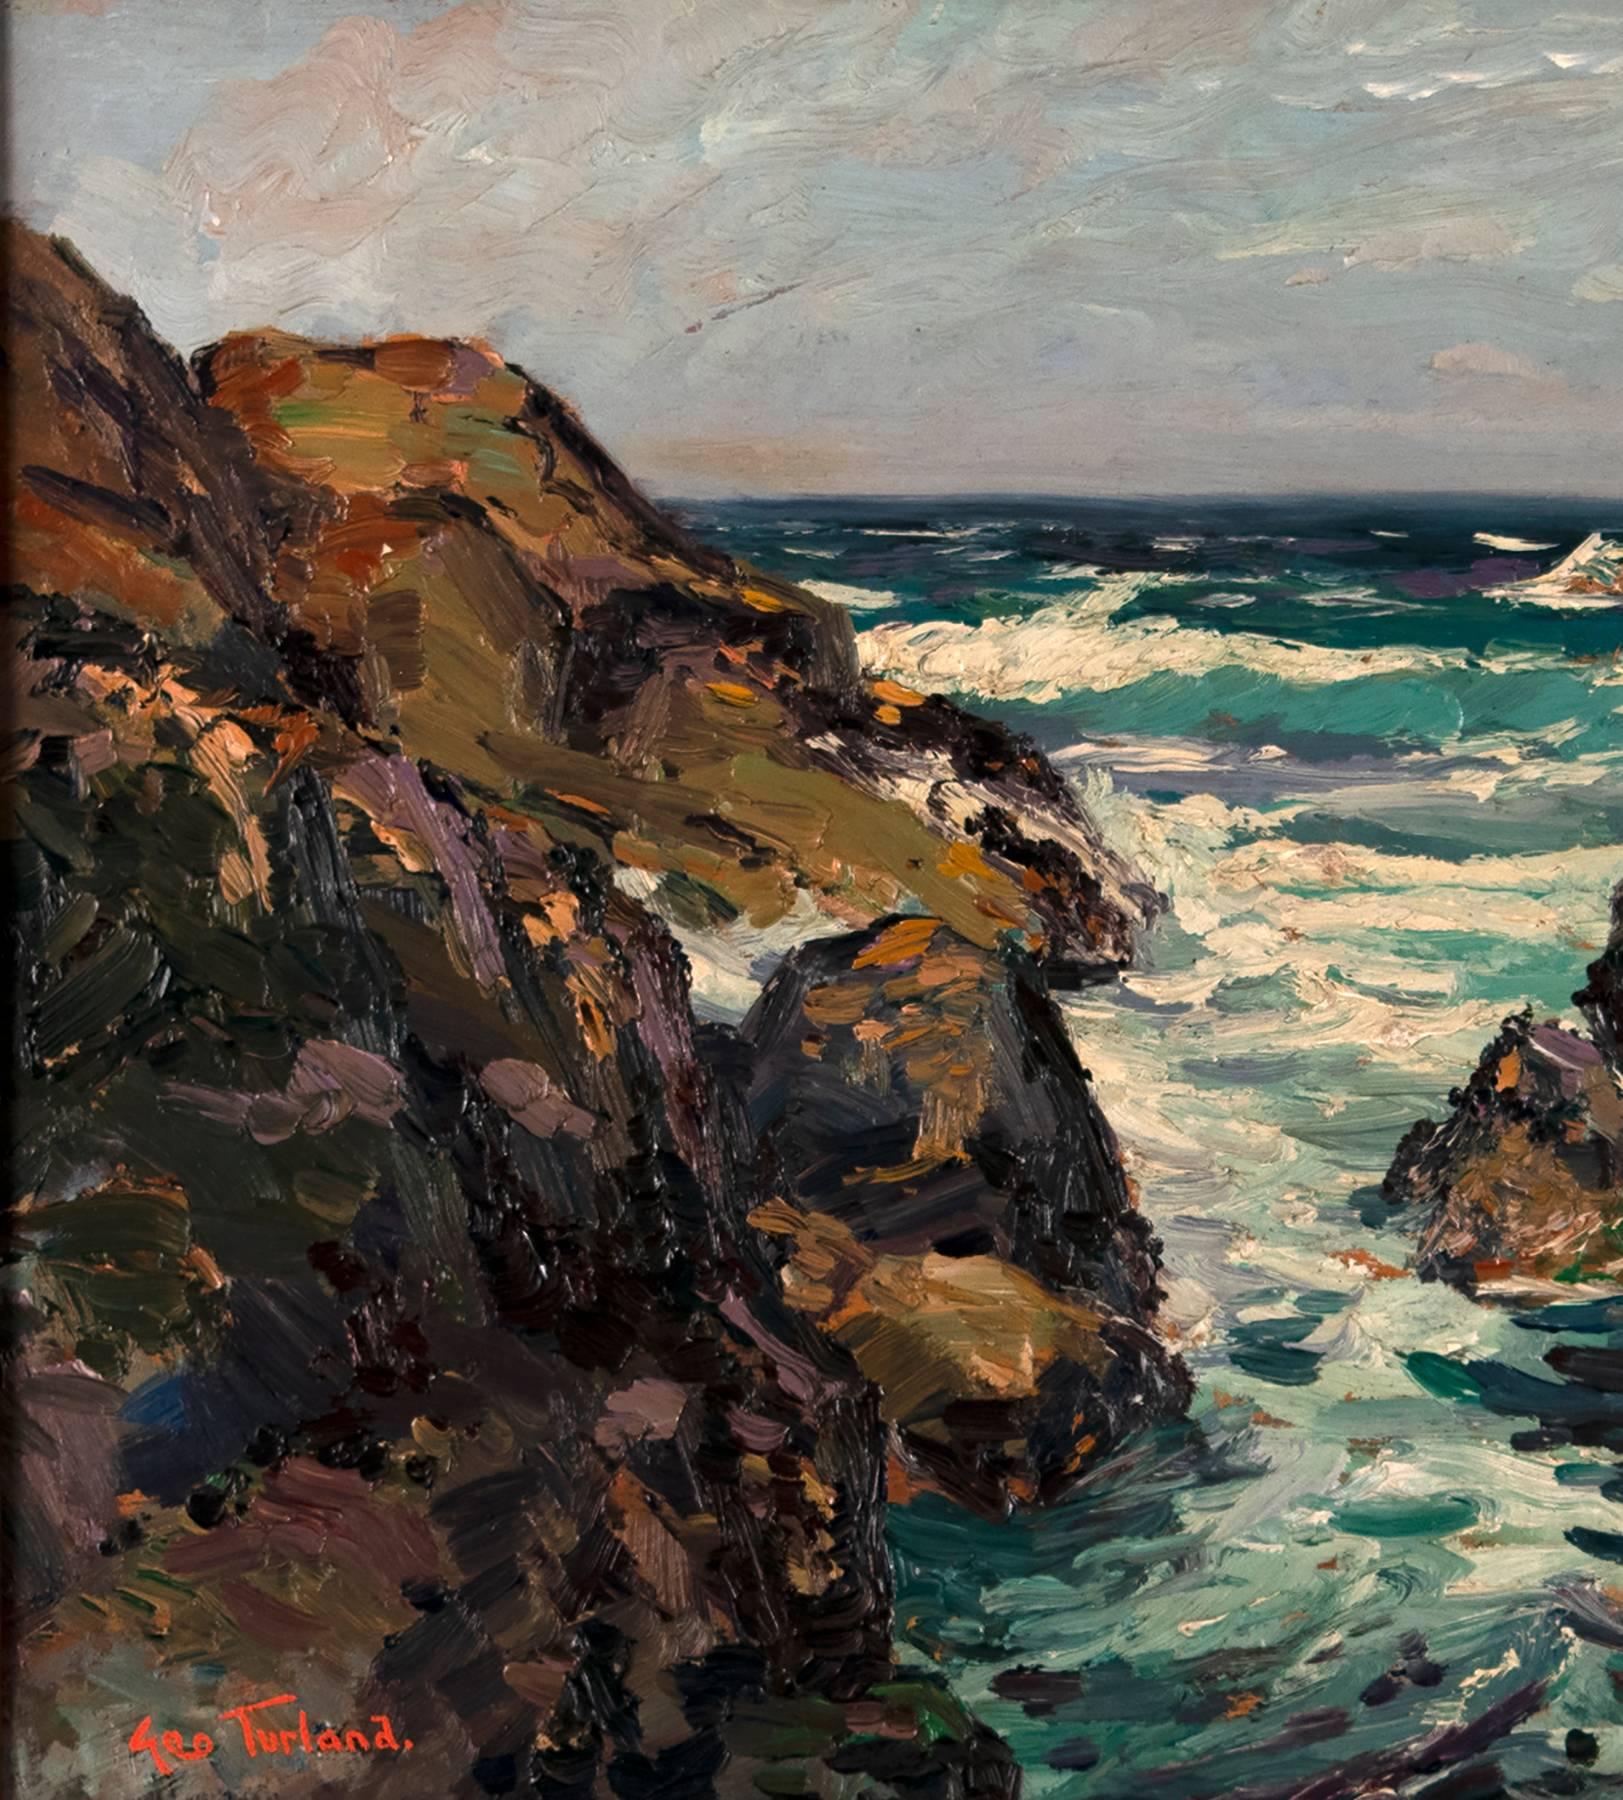 Untitled (Seascape) - Painting by George Turland